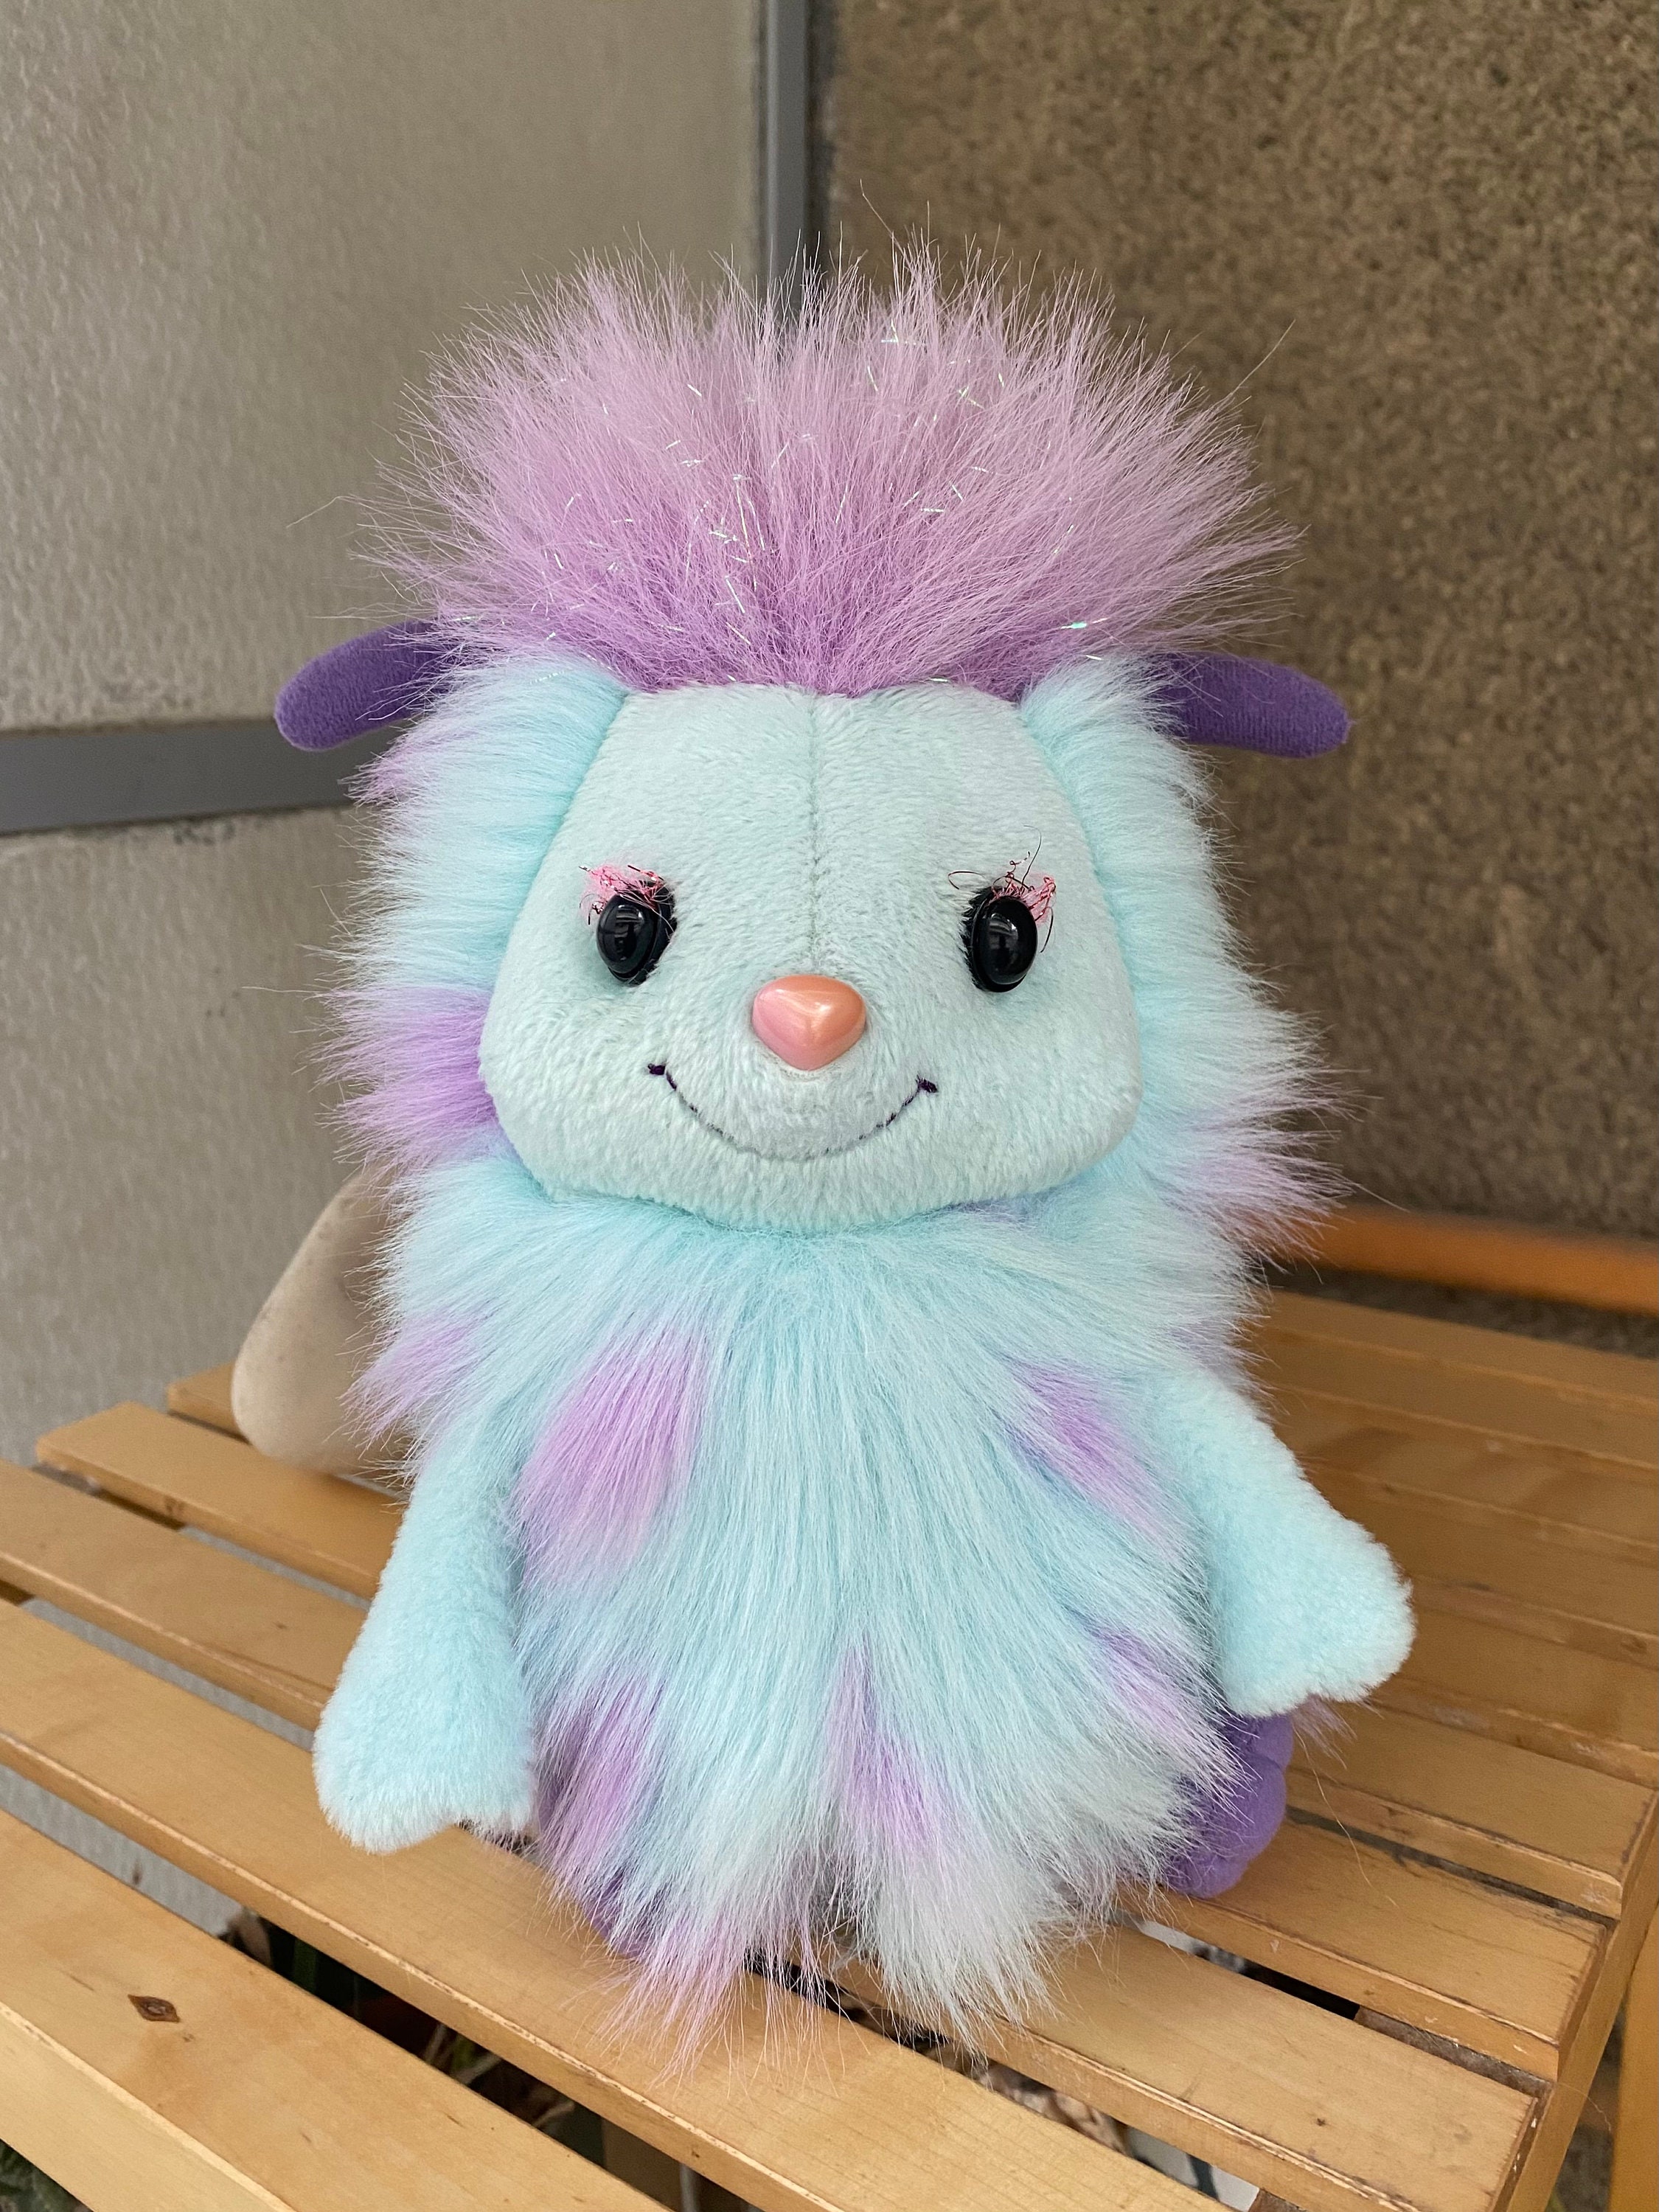  VERENIX Bib-ble Plush - 10 Cute Bibble Stuffed Spirit Animal  Toy for Kids and Fans - Collectible Kawaii Plushies Doll Unique Gift for  Boys and Girls : Toys & Games